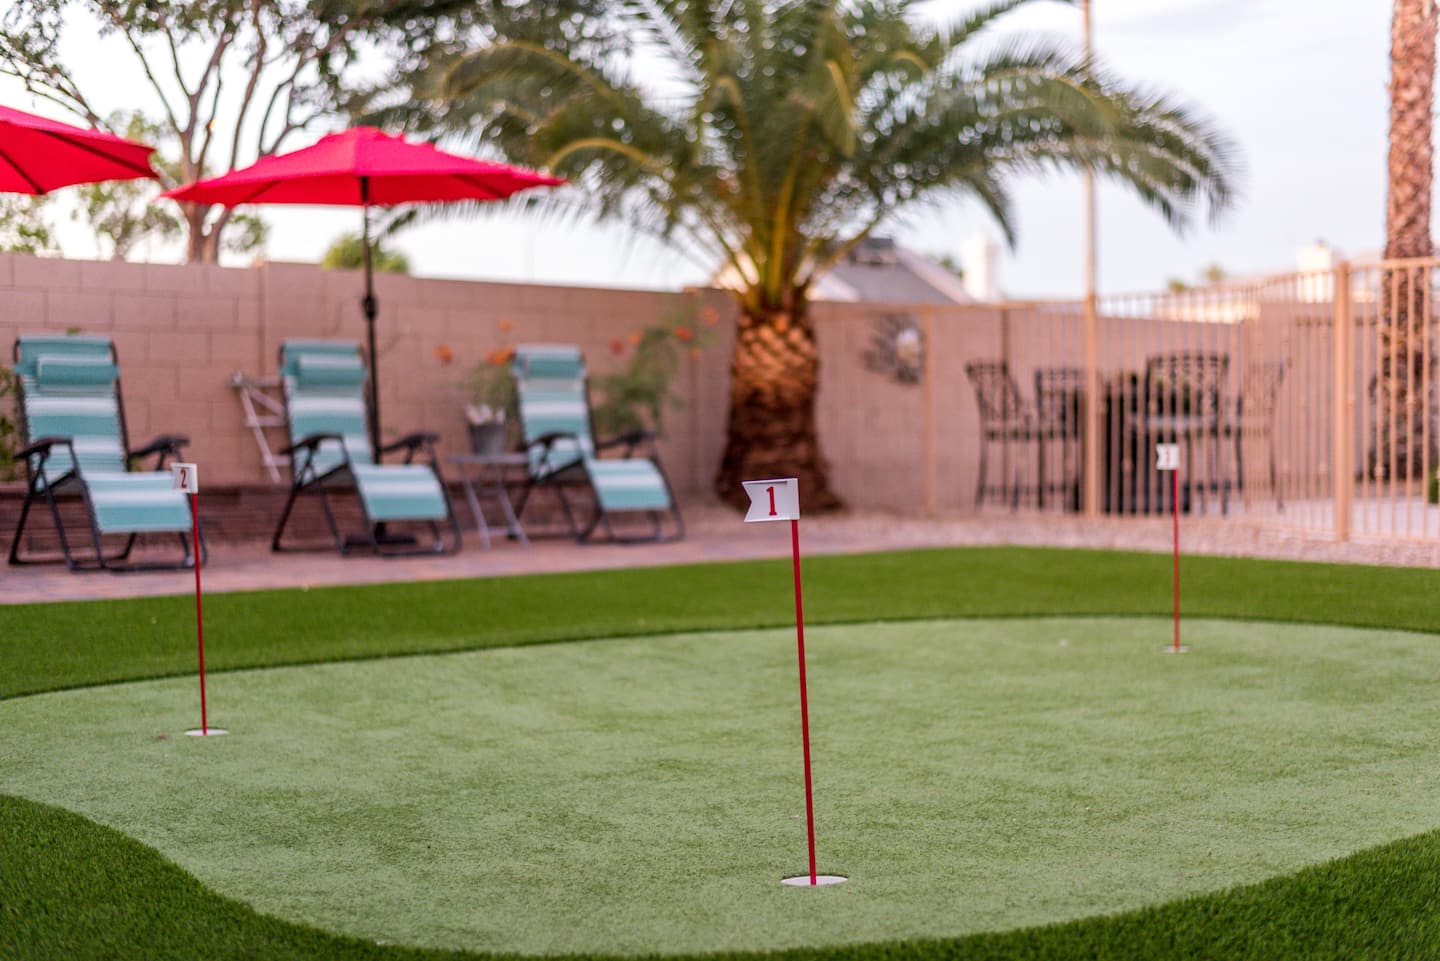 The homeowners wanted to practice their shots, so we installed a chipping green right in their backyard.